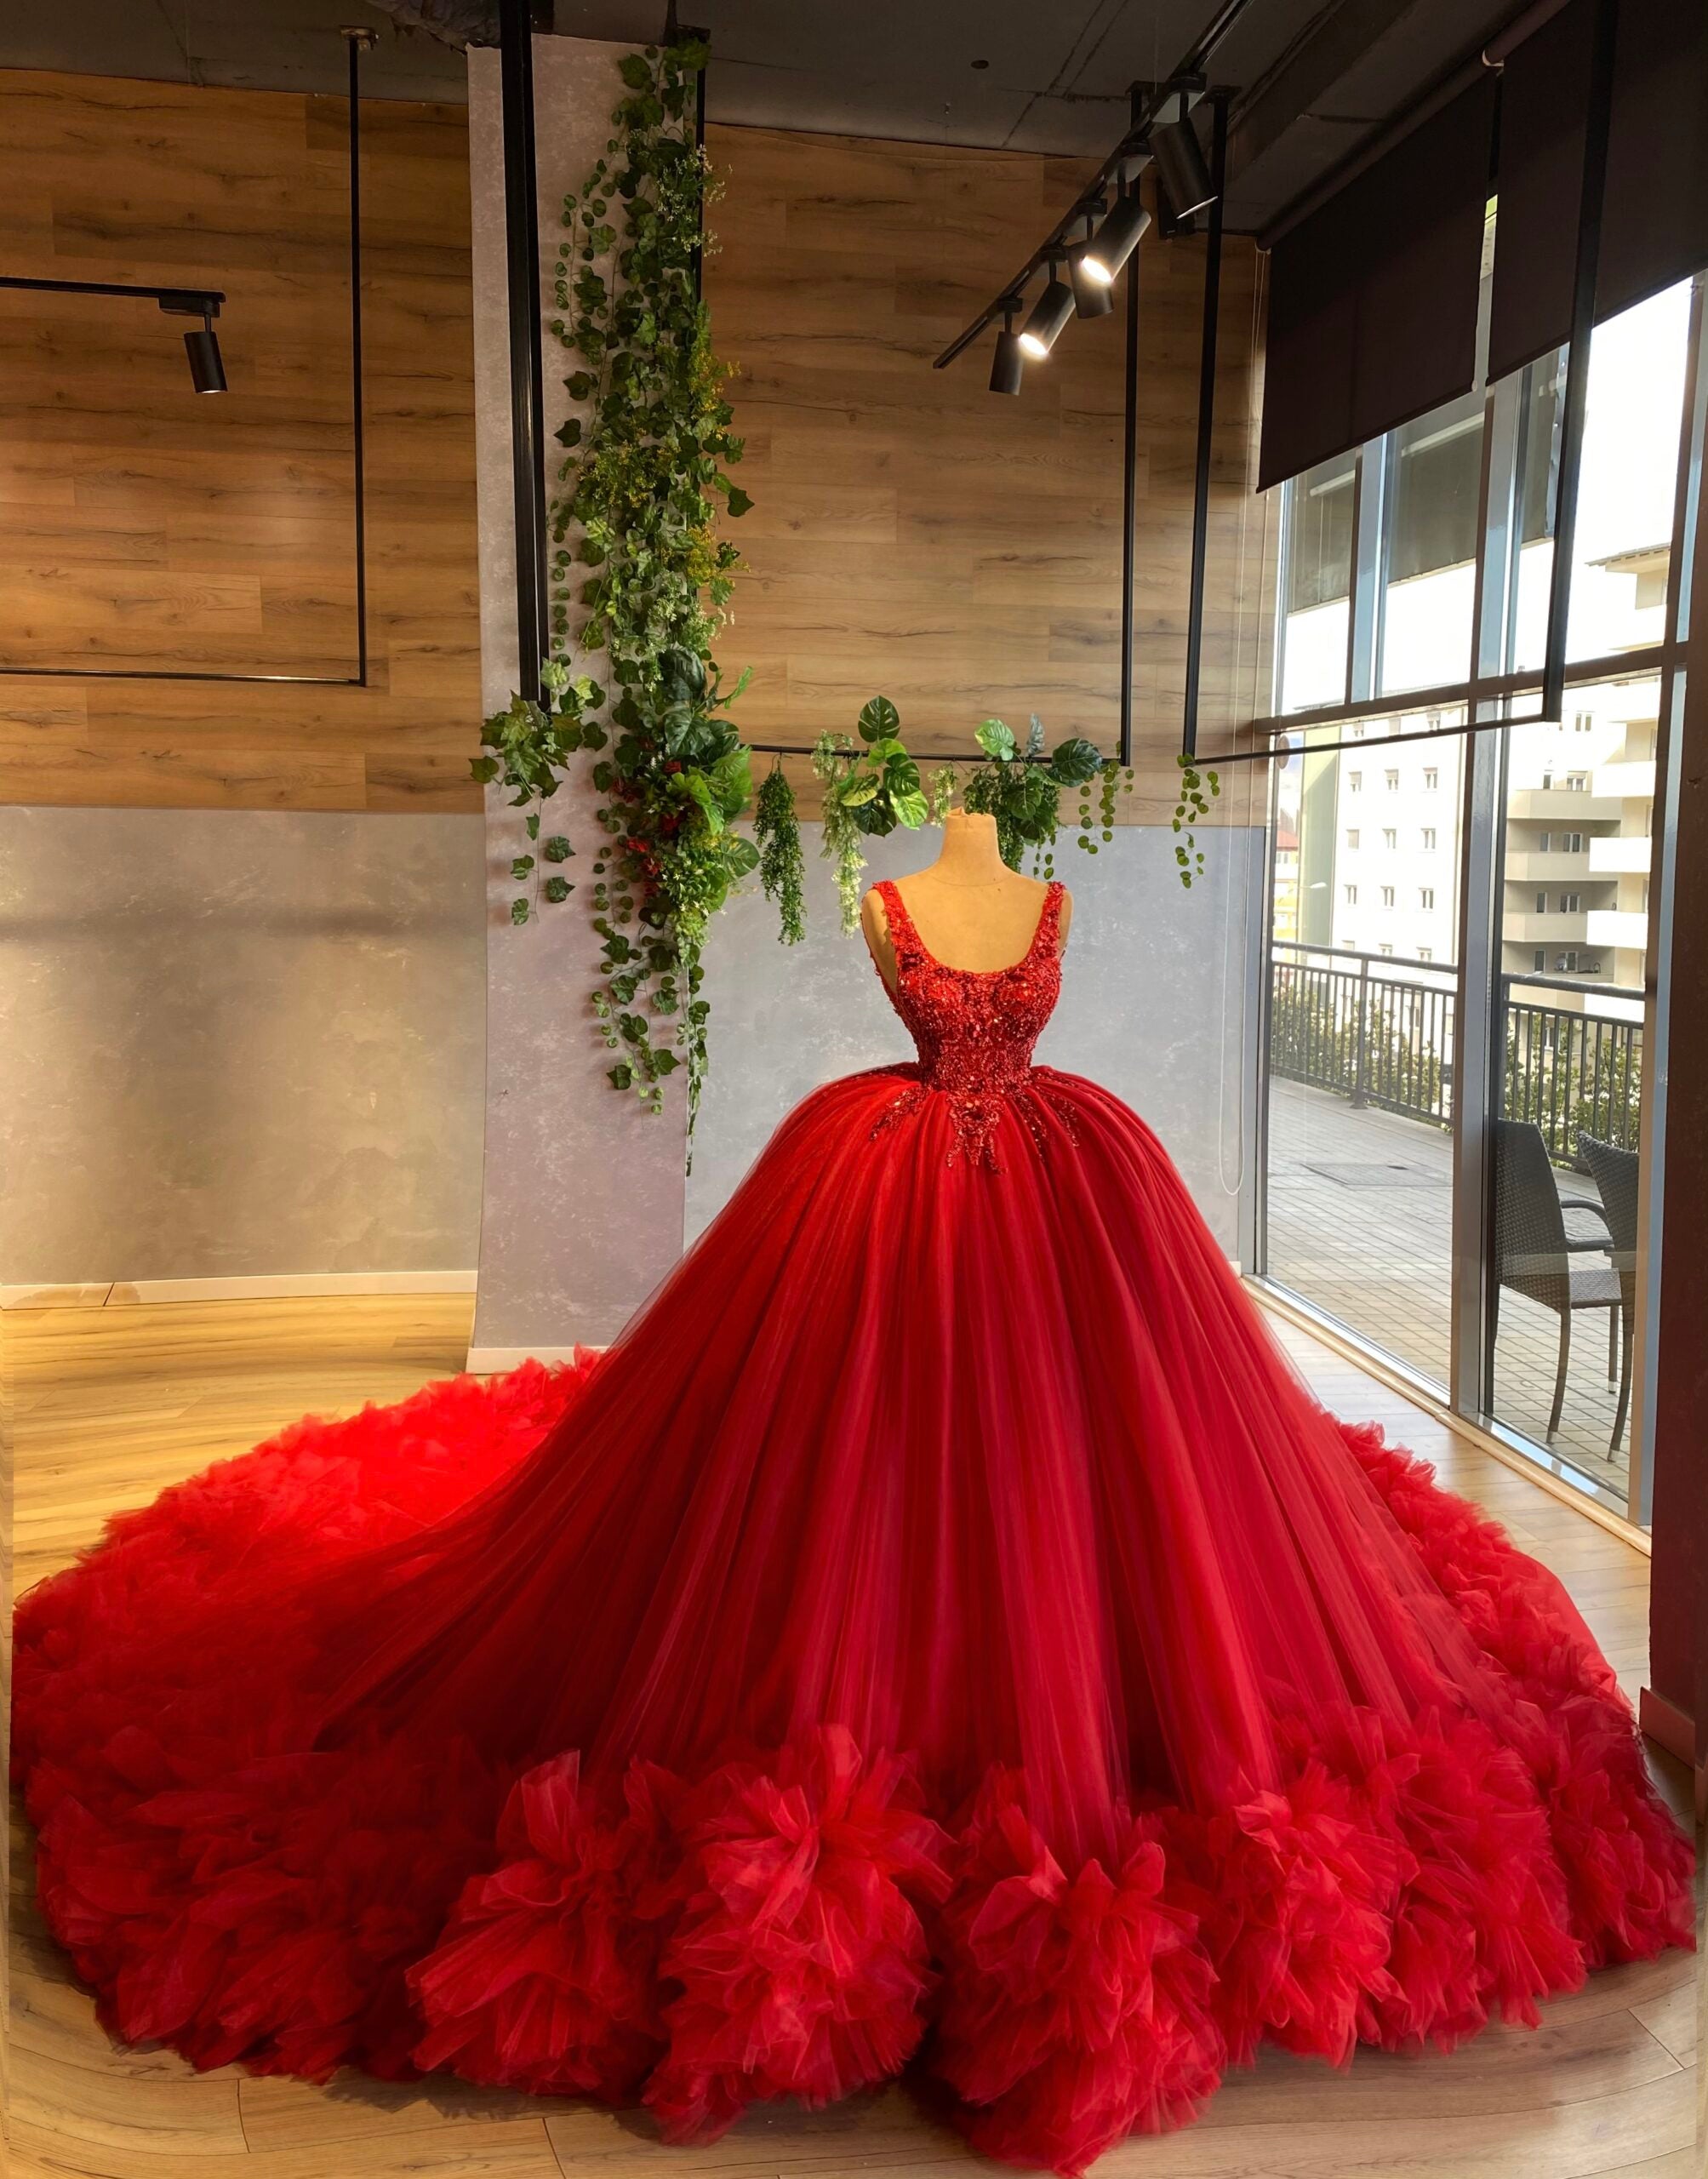 Women's off-shoulder super stylish fairy princess style flared tulle skirt evening  gown